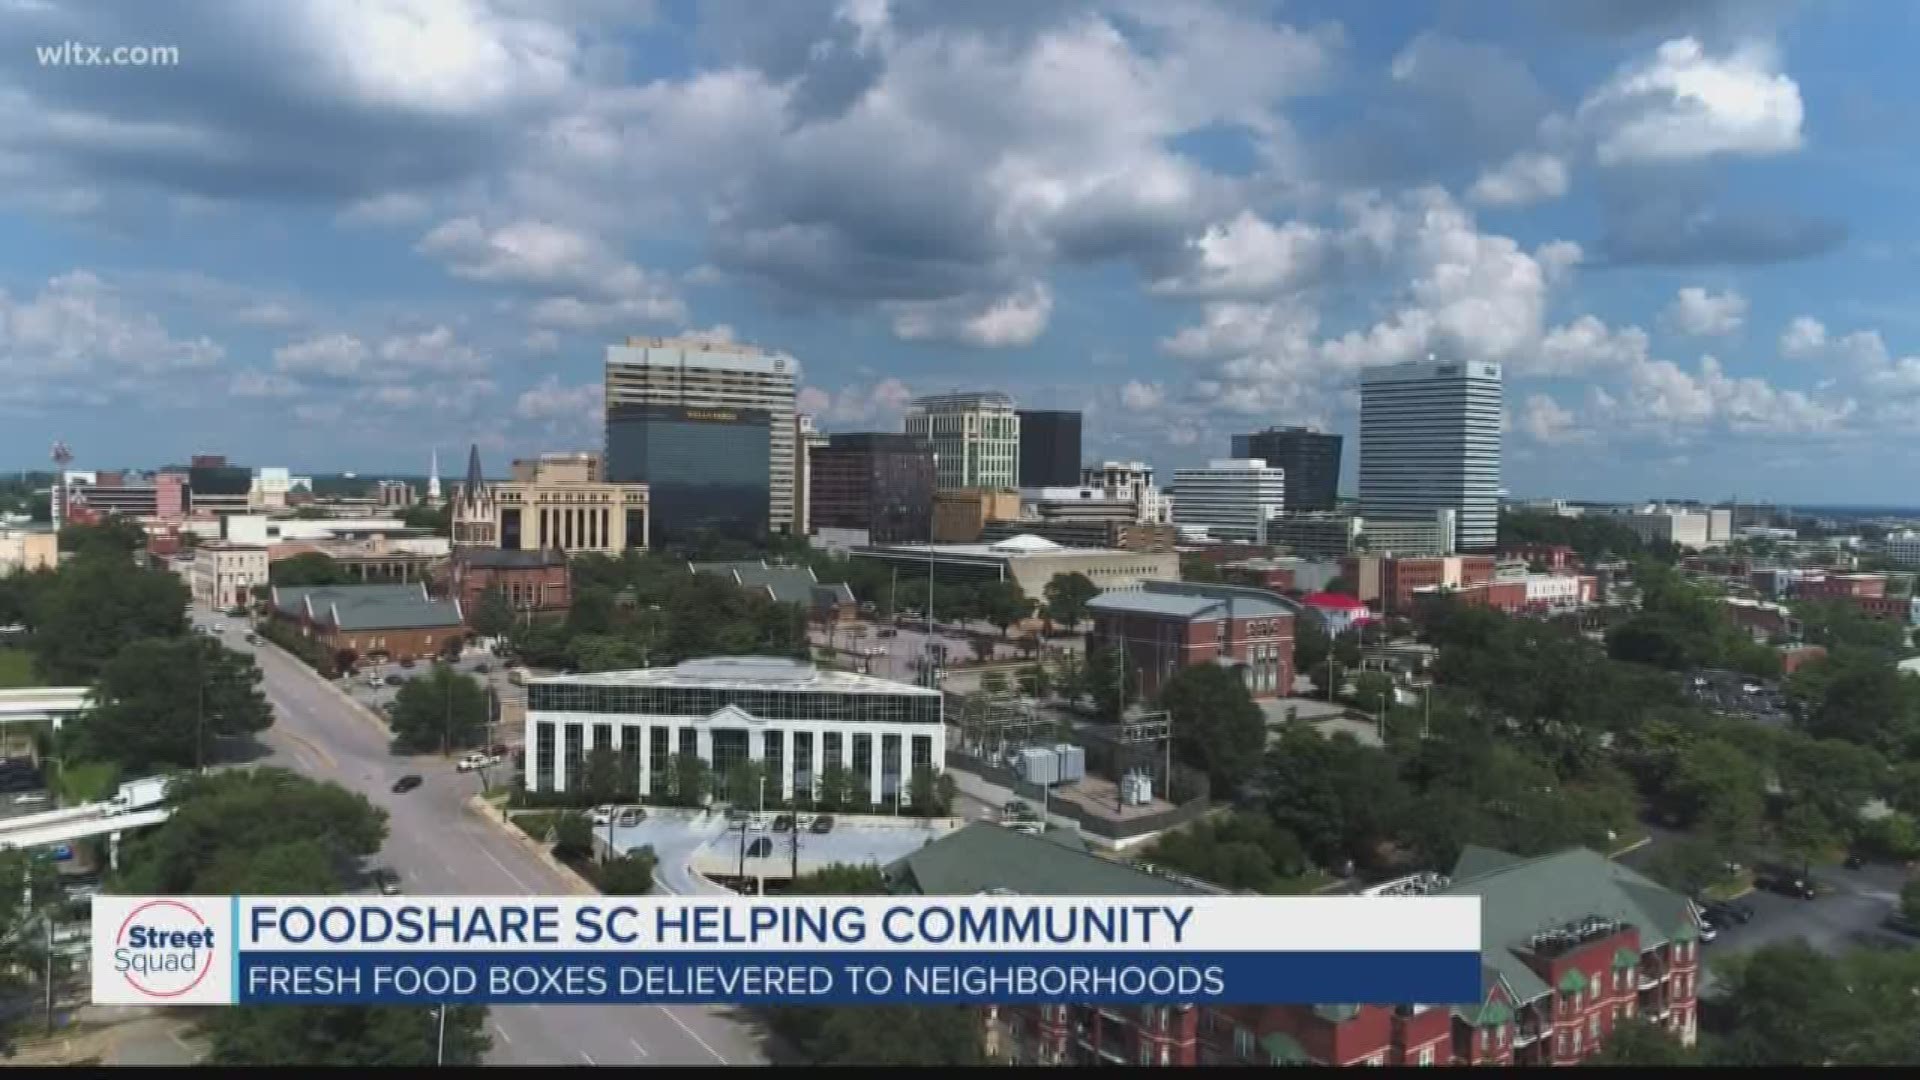 FoodShare South Carolina is hoping with the demand for food boxes, this will help bring back  workers who may have been laid off because of COVID-19.